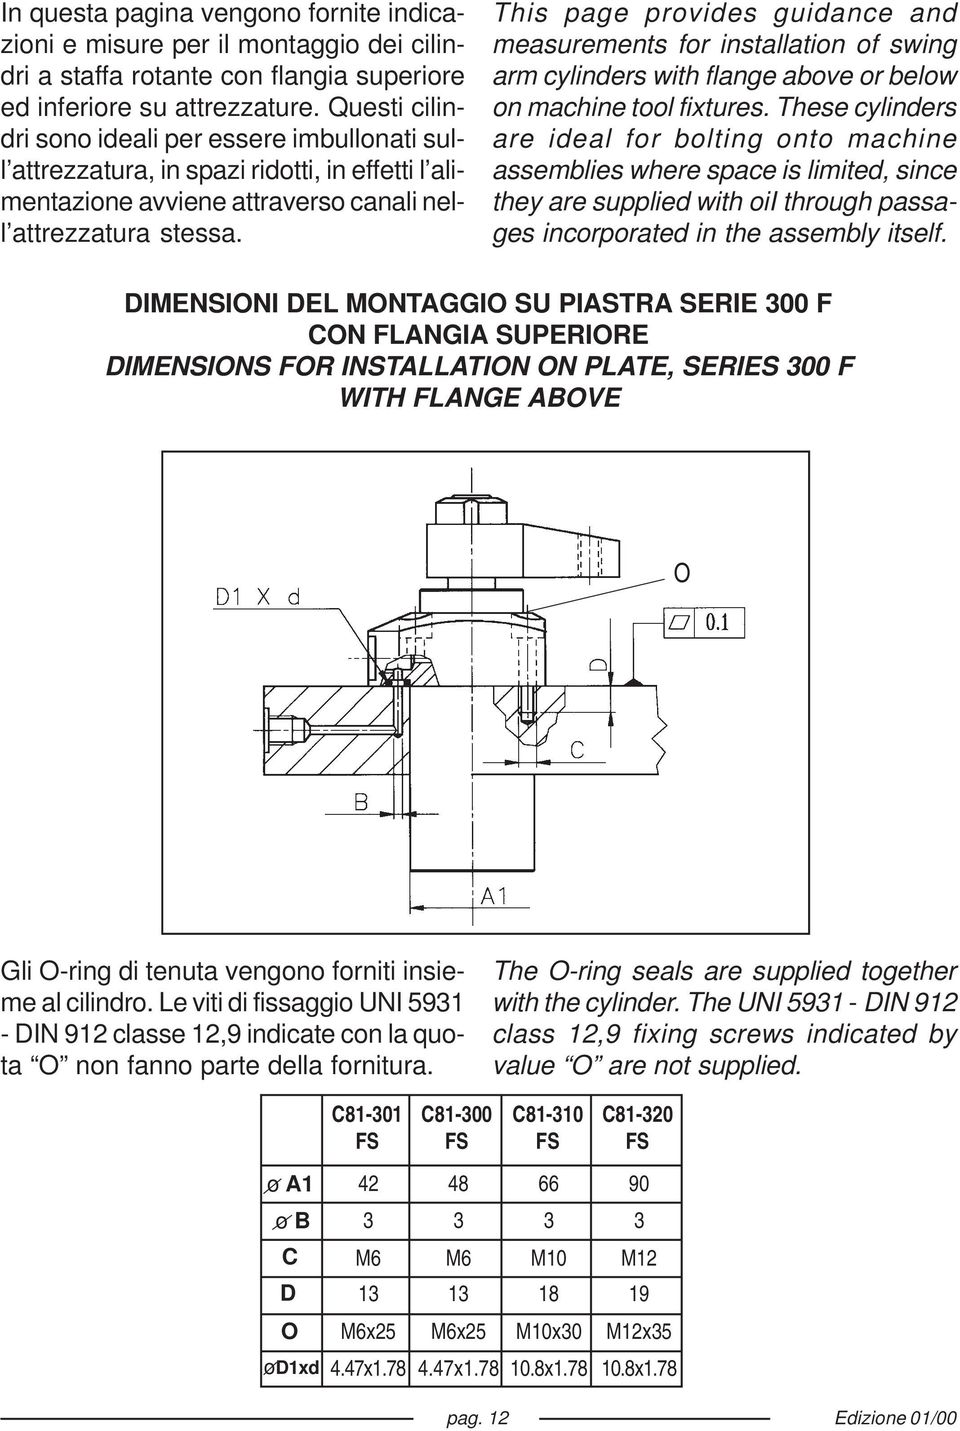 This page provides guidance and measurements for installation of swing arm cylinders with flange above or below on machine tool fixtures.